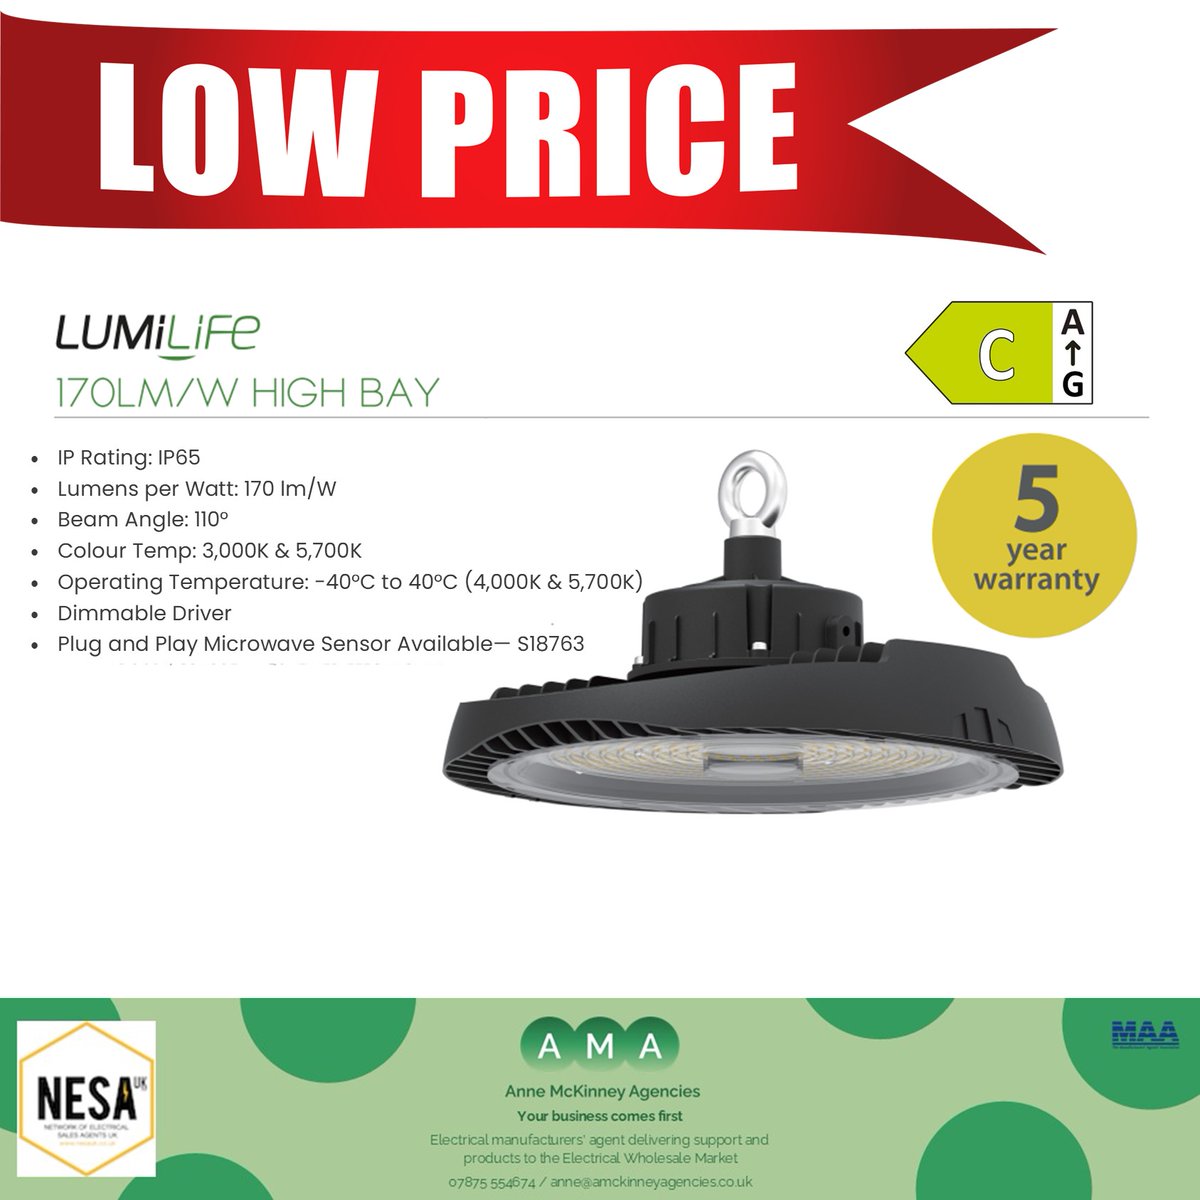 We have some great pricing available on the #Lumilife Mountain 150W #Highbay from Supreme PLC. Get in touch now for more info:

📞Lucy 07940 246832
📨lucy@amckinneyagencies.co.uk

#ElectricalWholesalers #Lighting #CommercialLighting